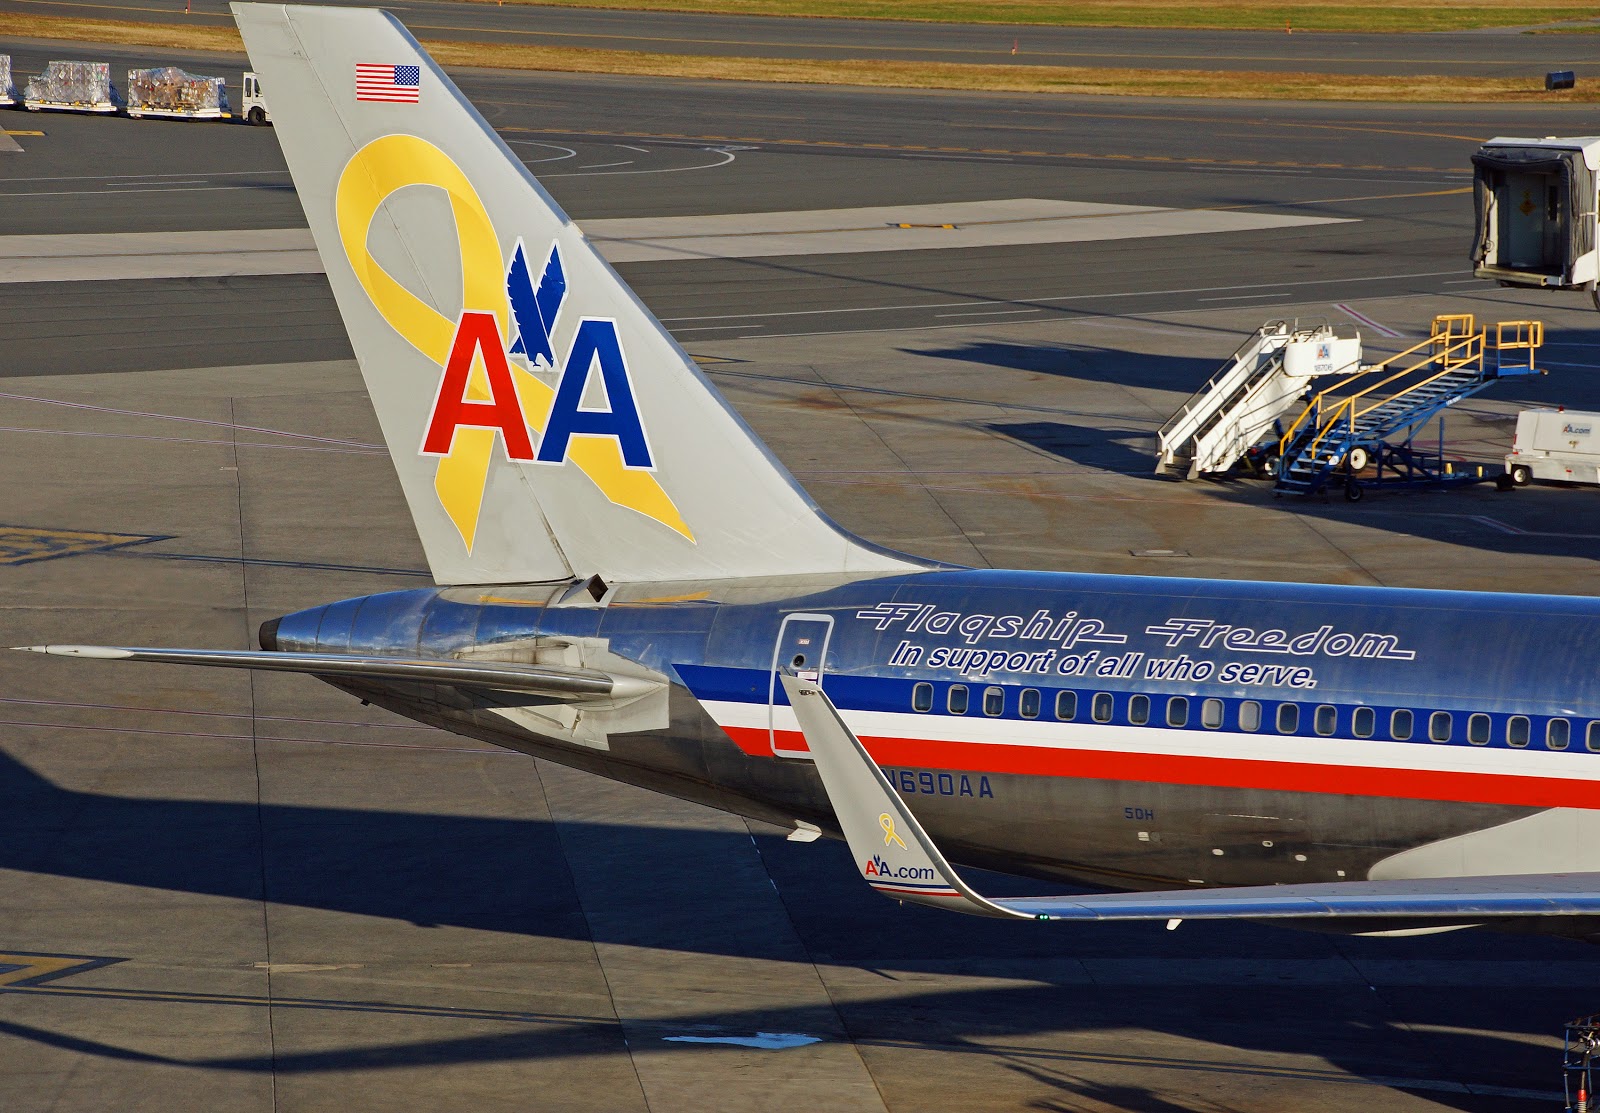 AMERICAN AIRLINES AND ARIZONA FC